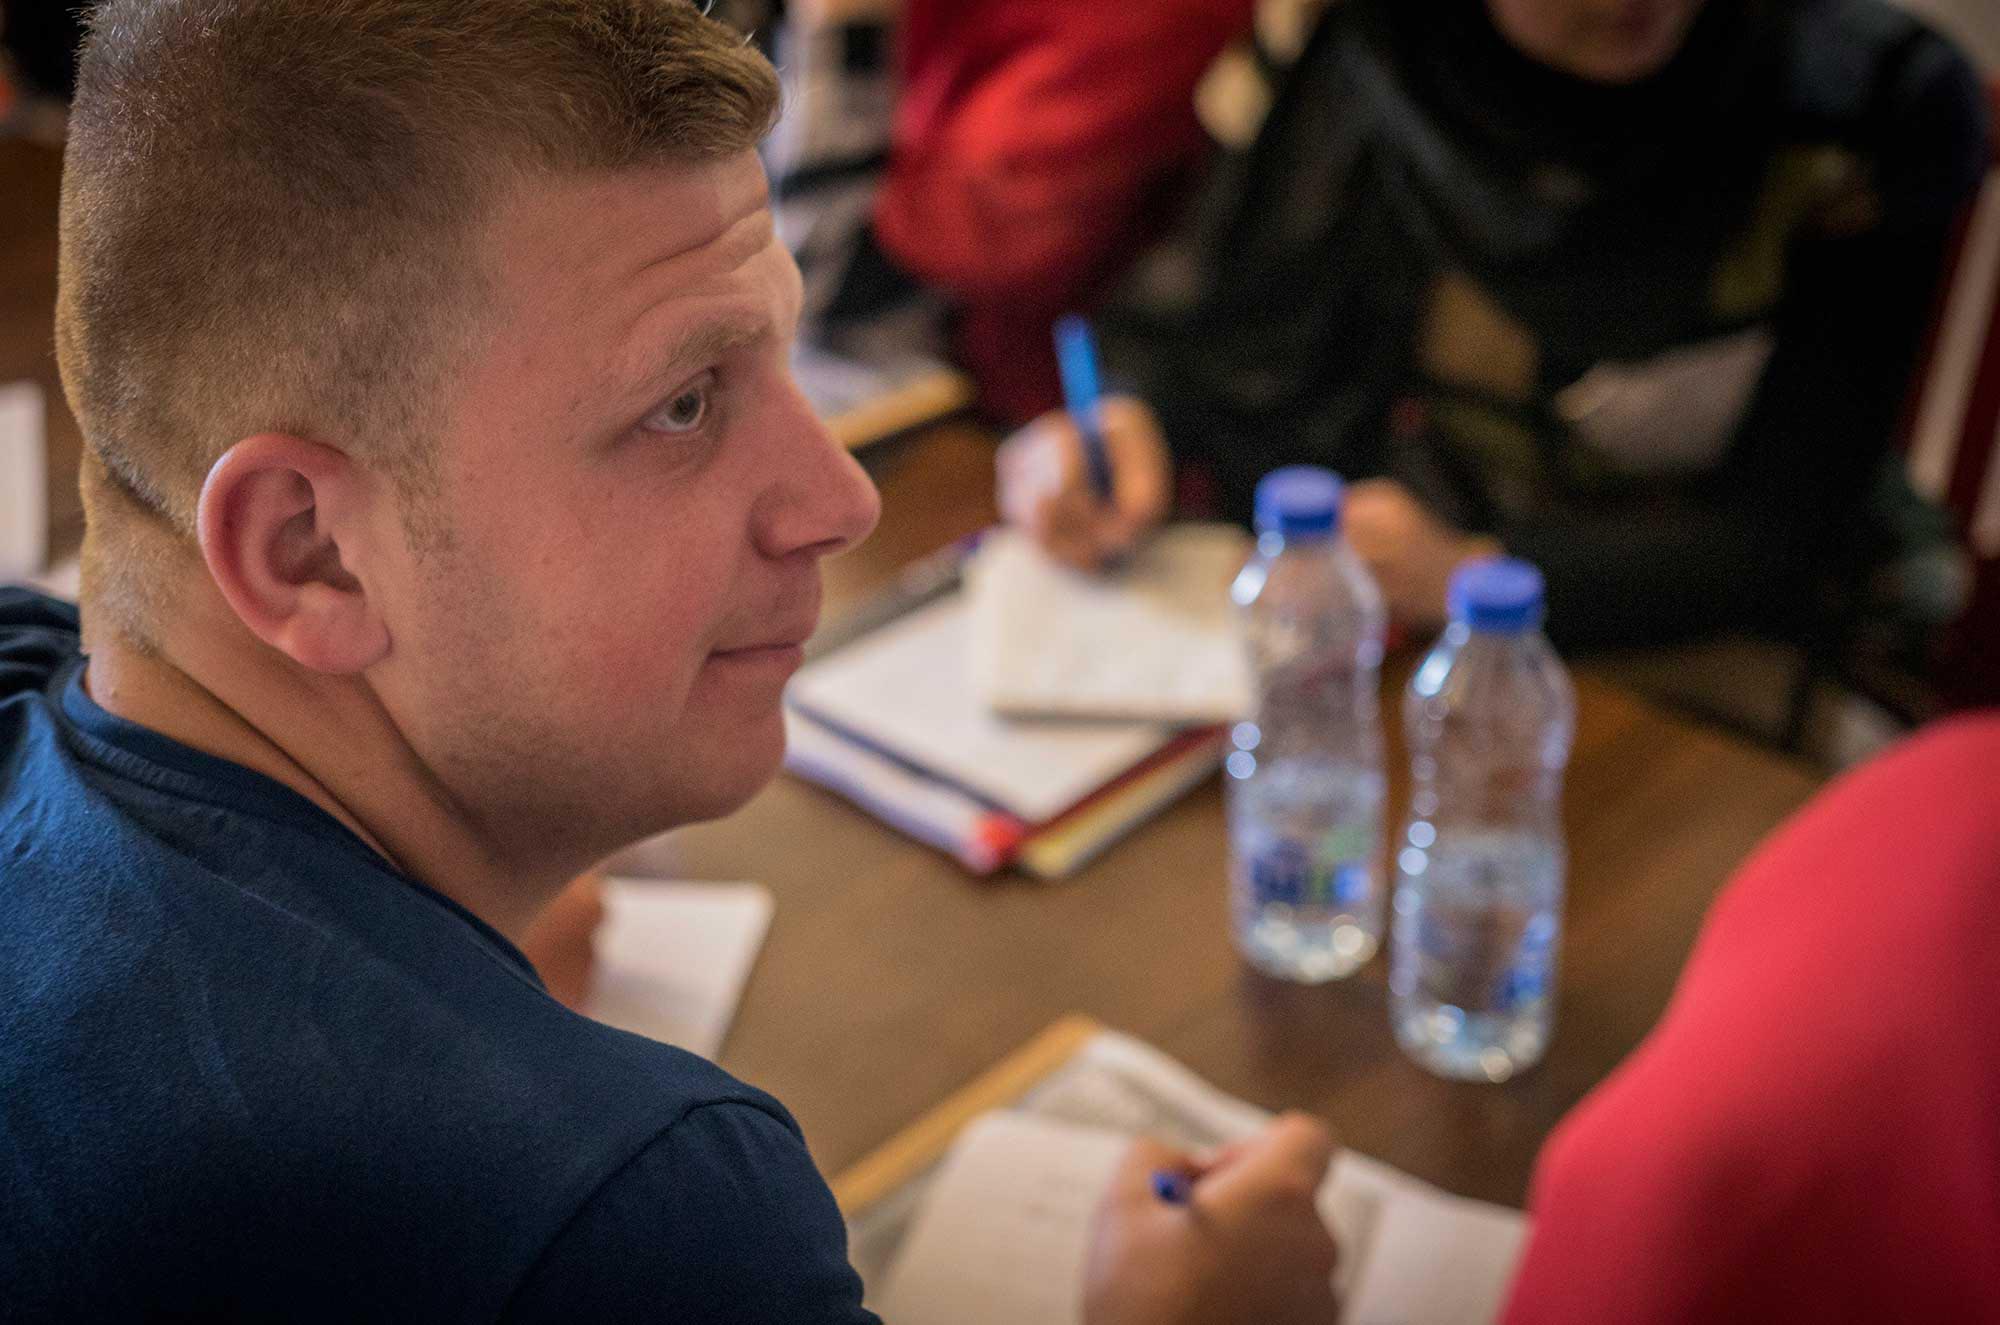 Raed takes English classes as part of Anera's program for refugee education in Lebanon.